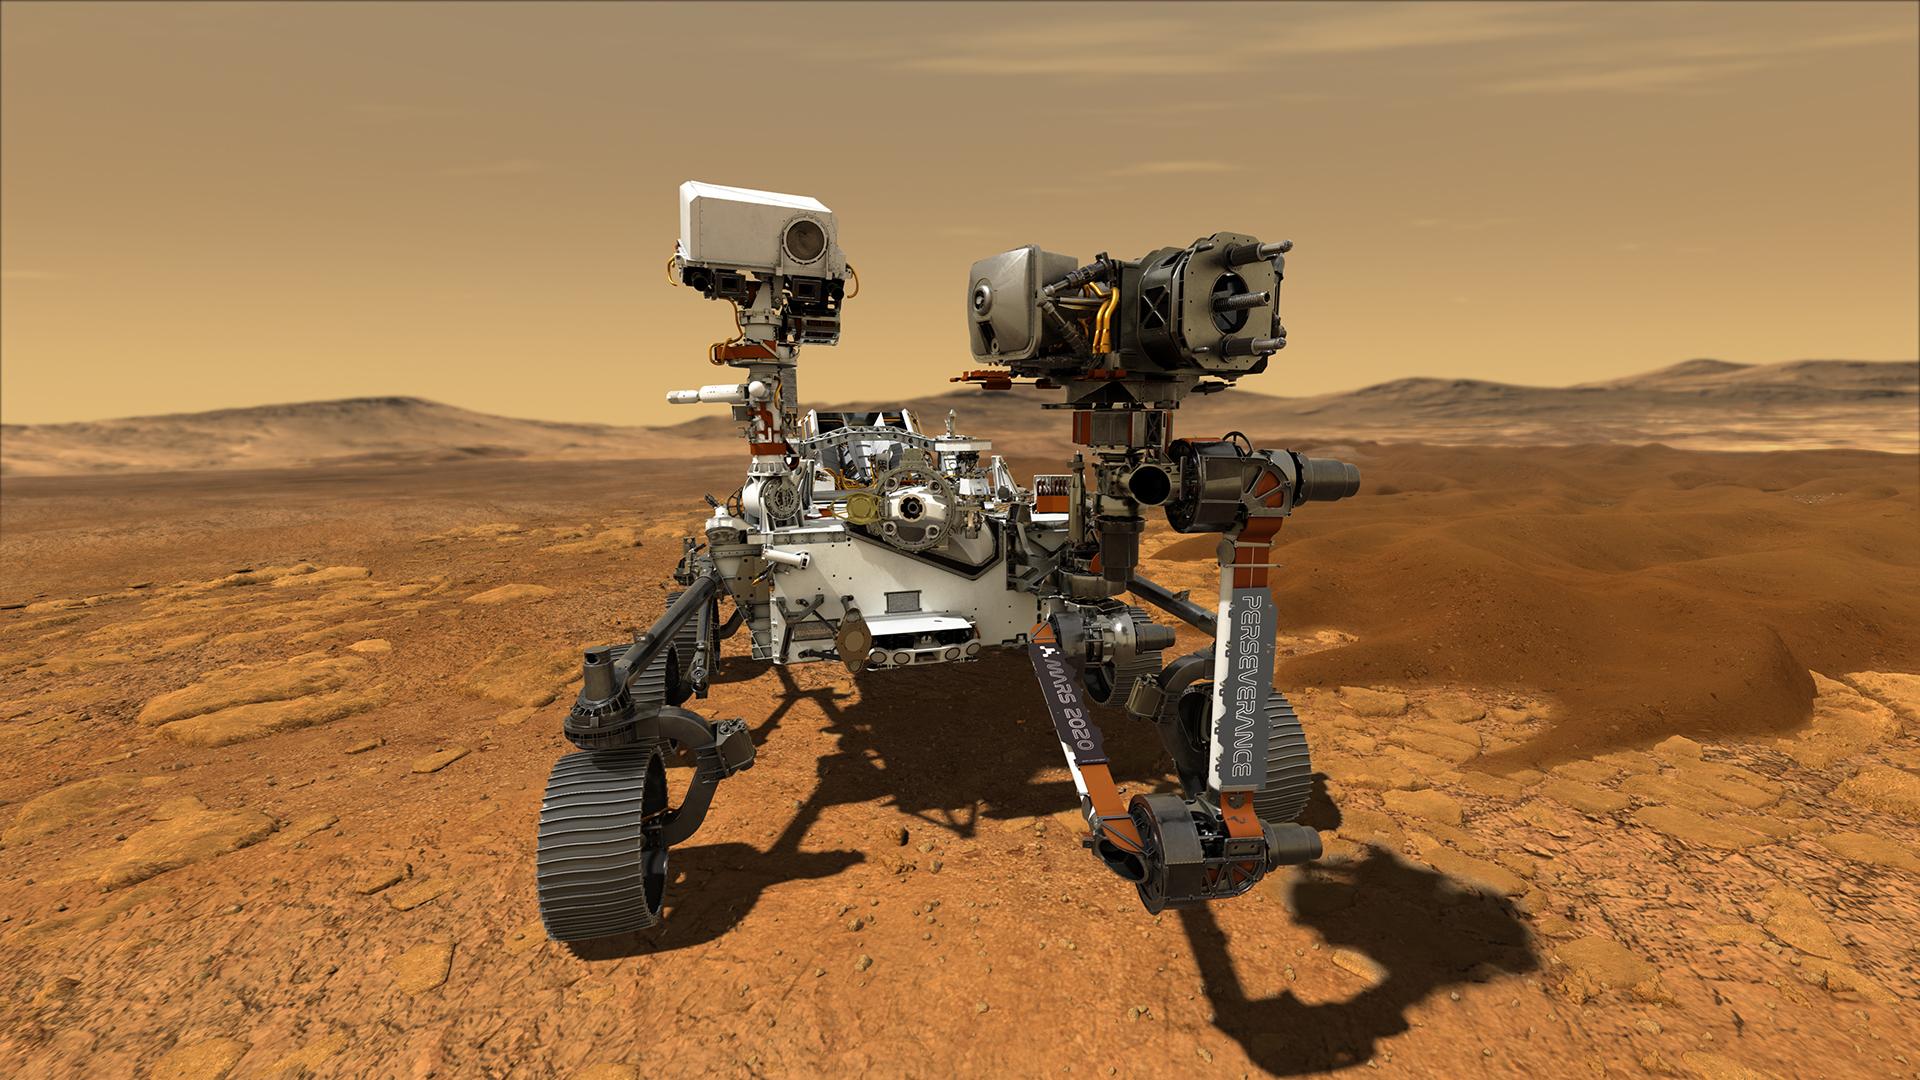 Illustration depicts NASA's Perseverance rover operating on the surface of Mars. Credit: NASA/JPL-Caltech